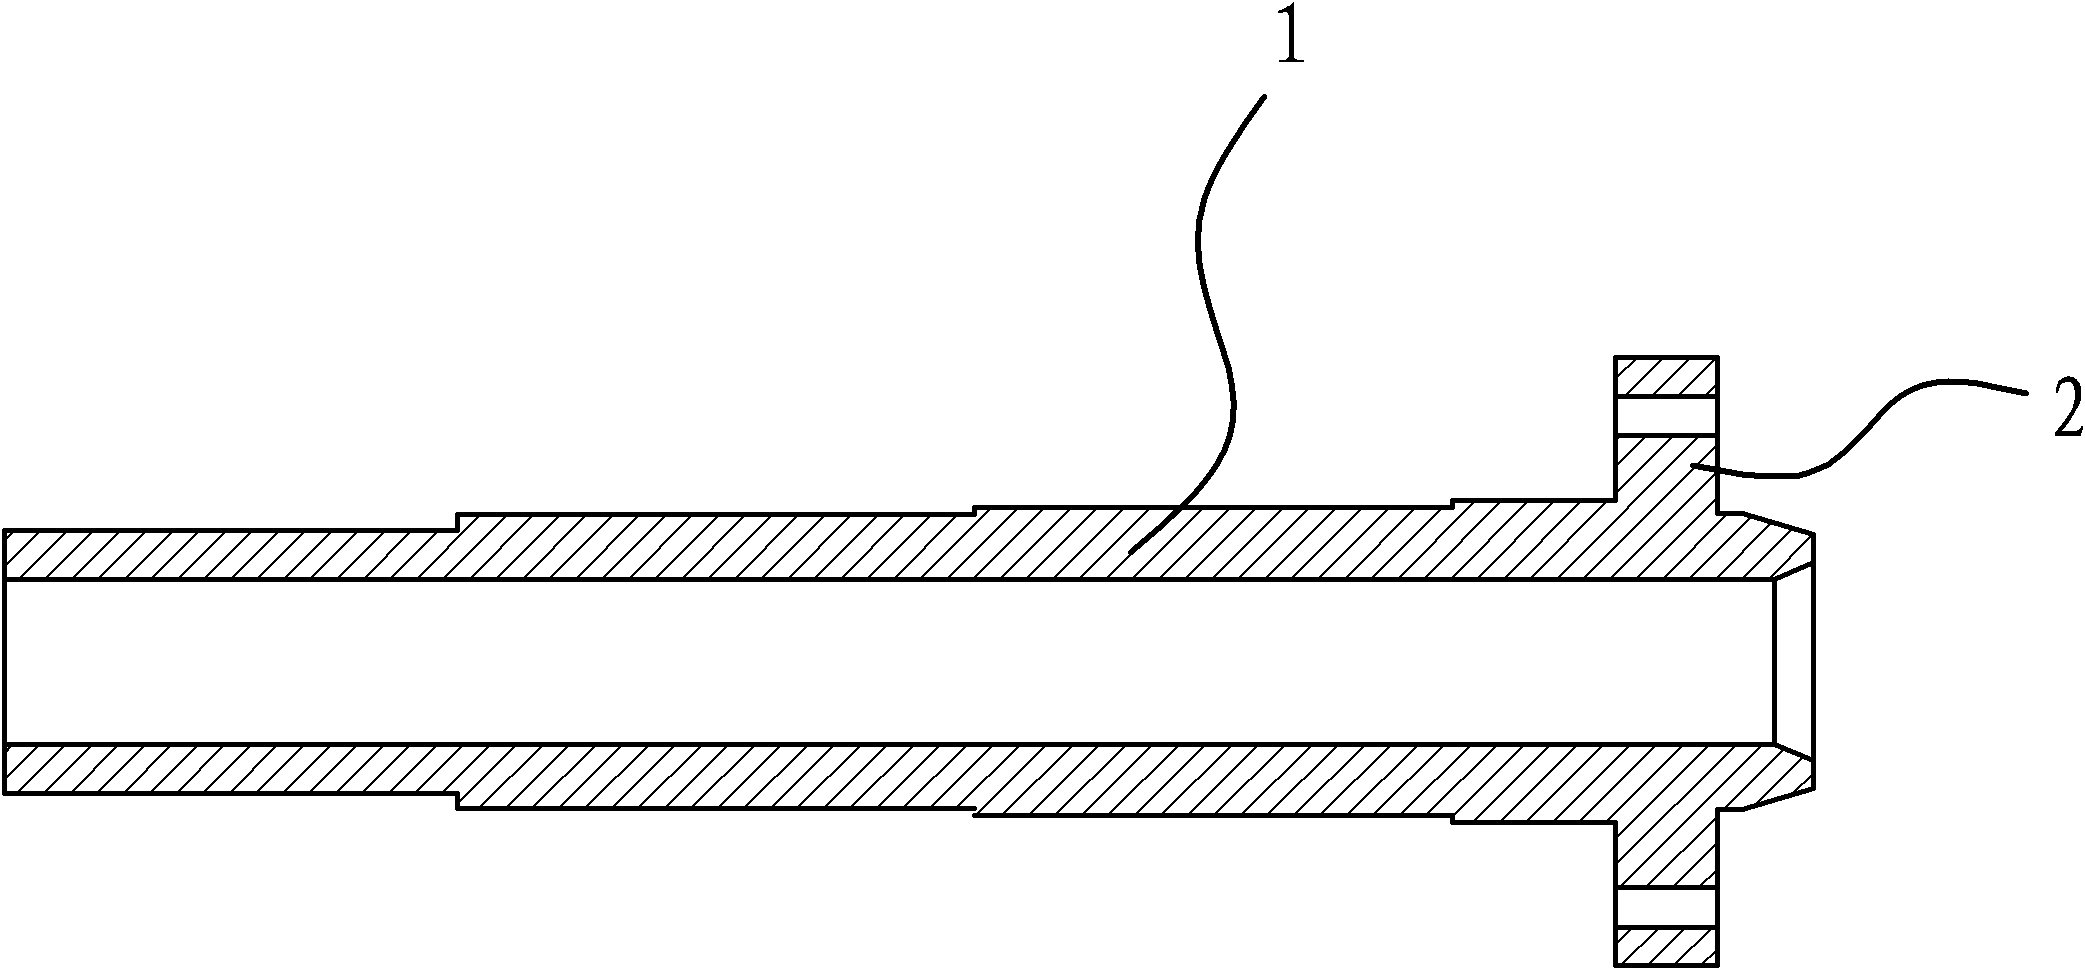 Method for processing lathe spindle